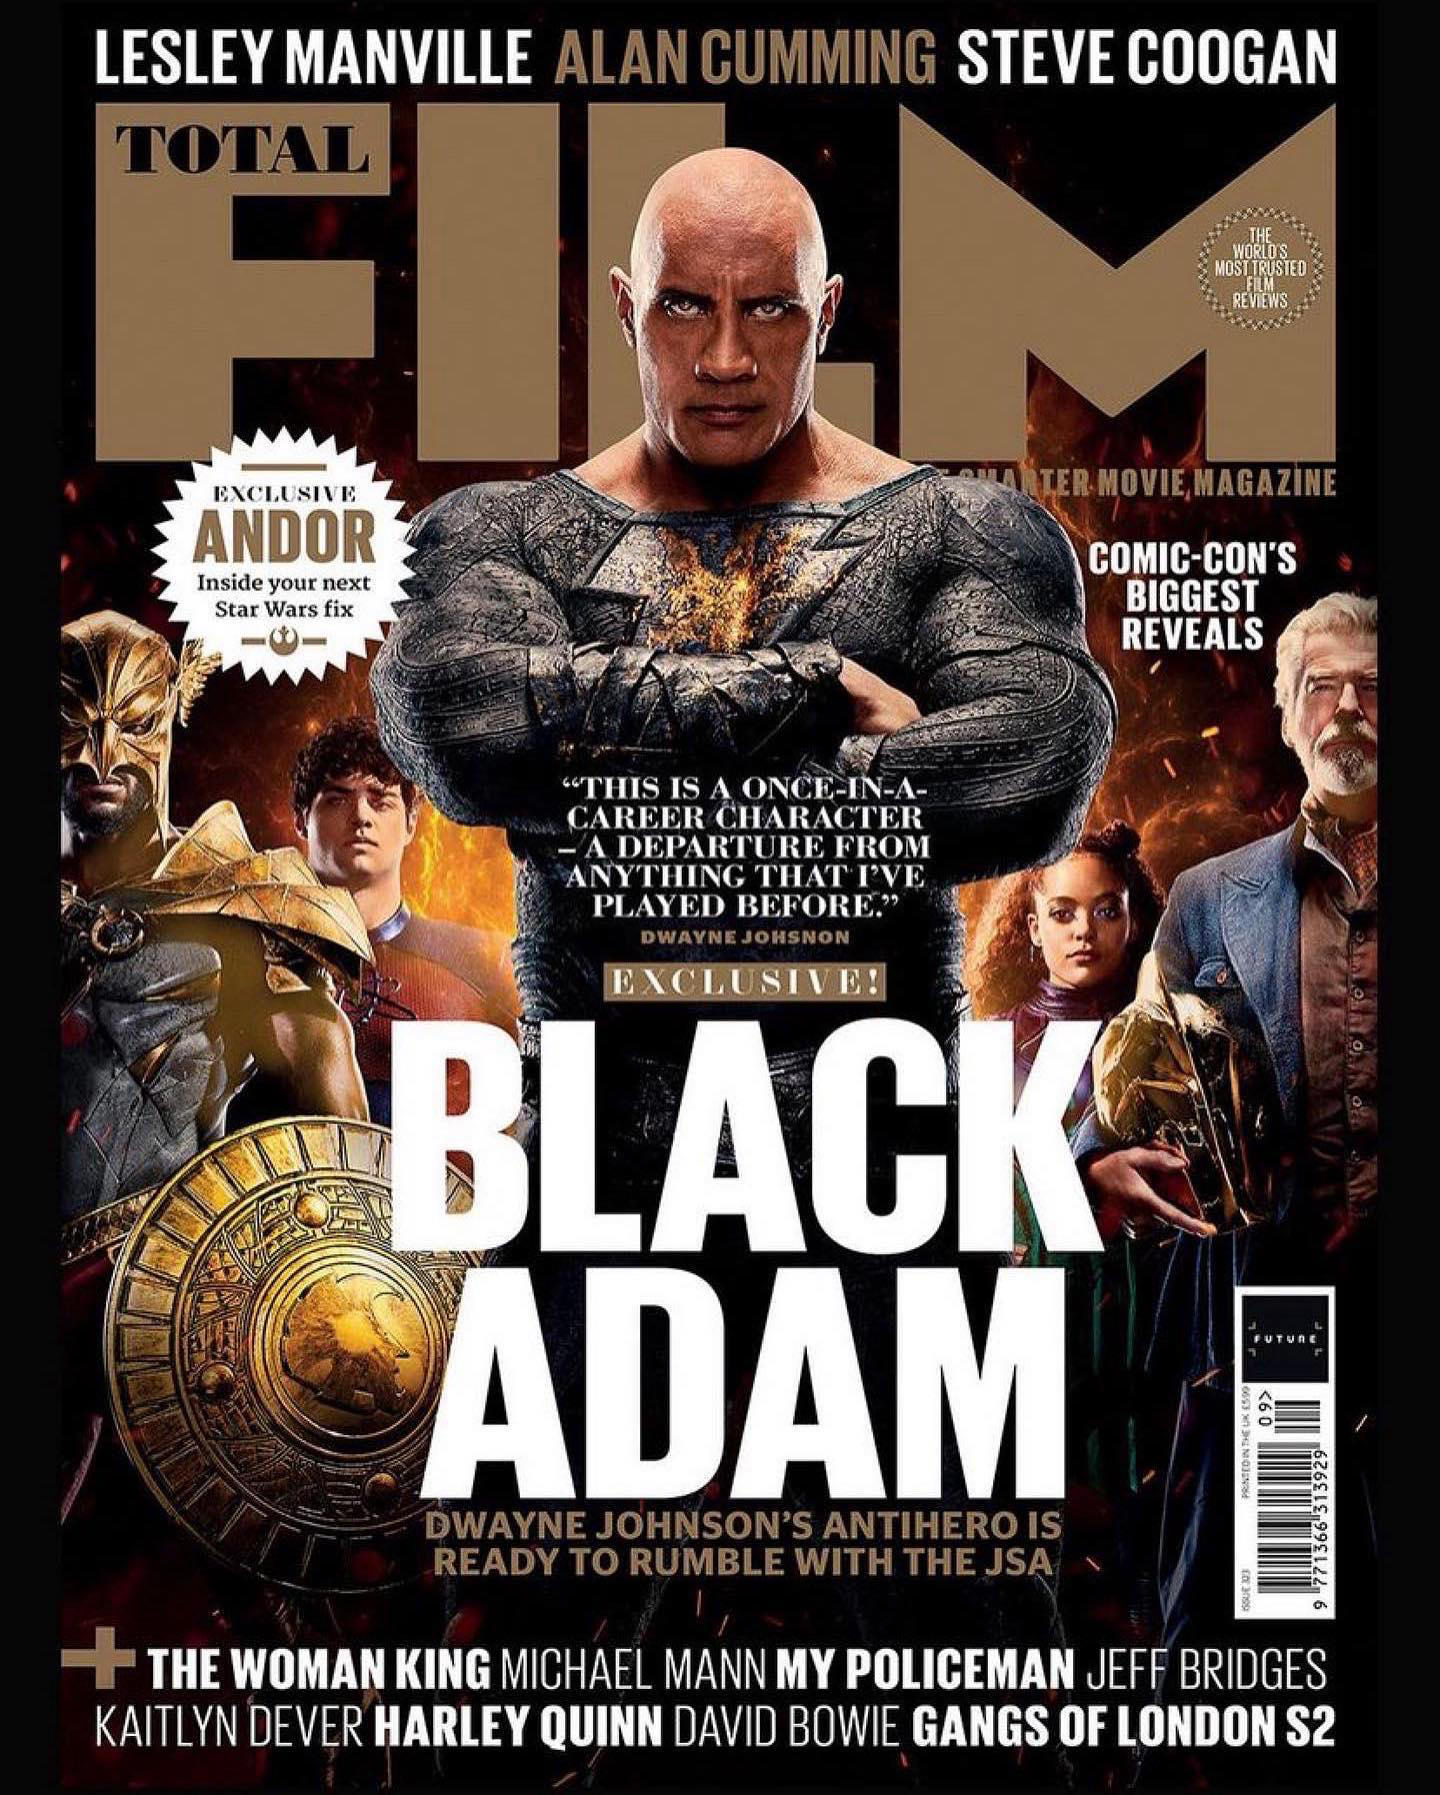 Warner Bros. Pictures - #Repost #therock The #BlackAdam takeover of #totalfilm is HERE